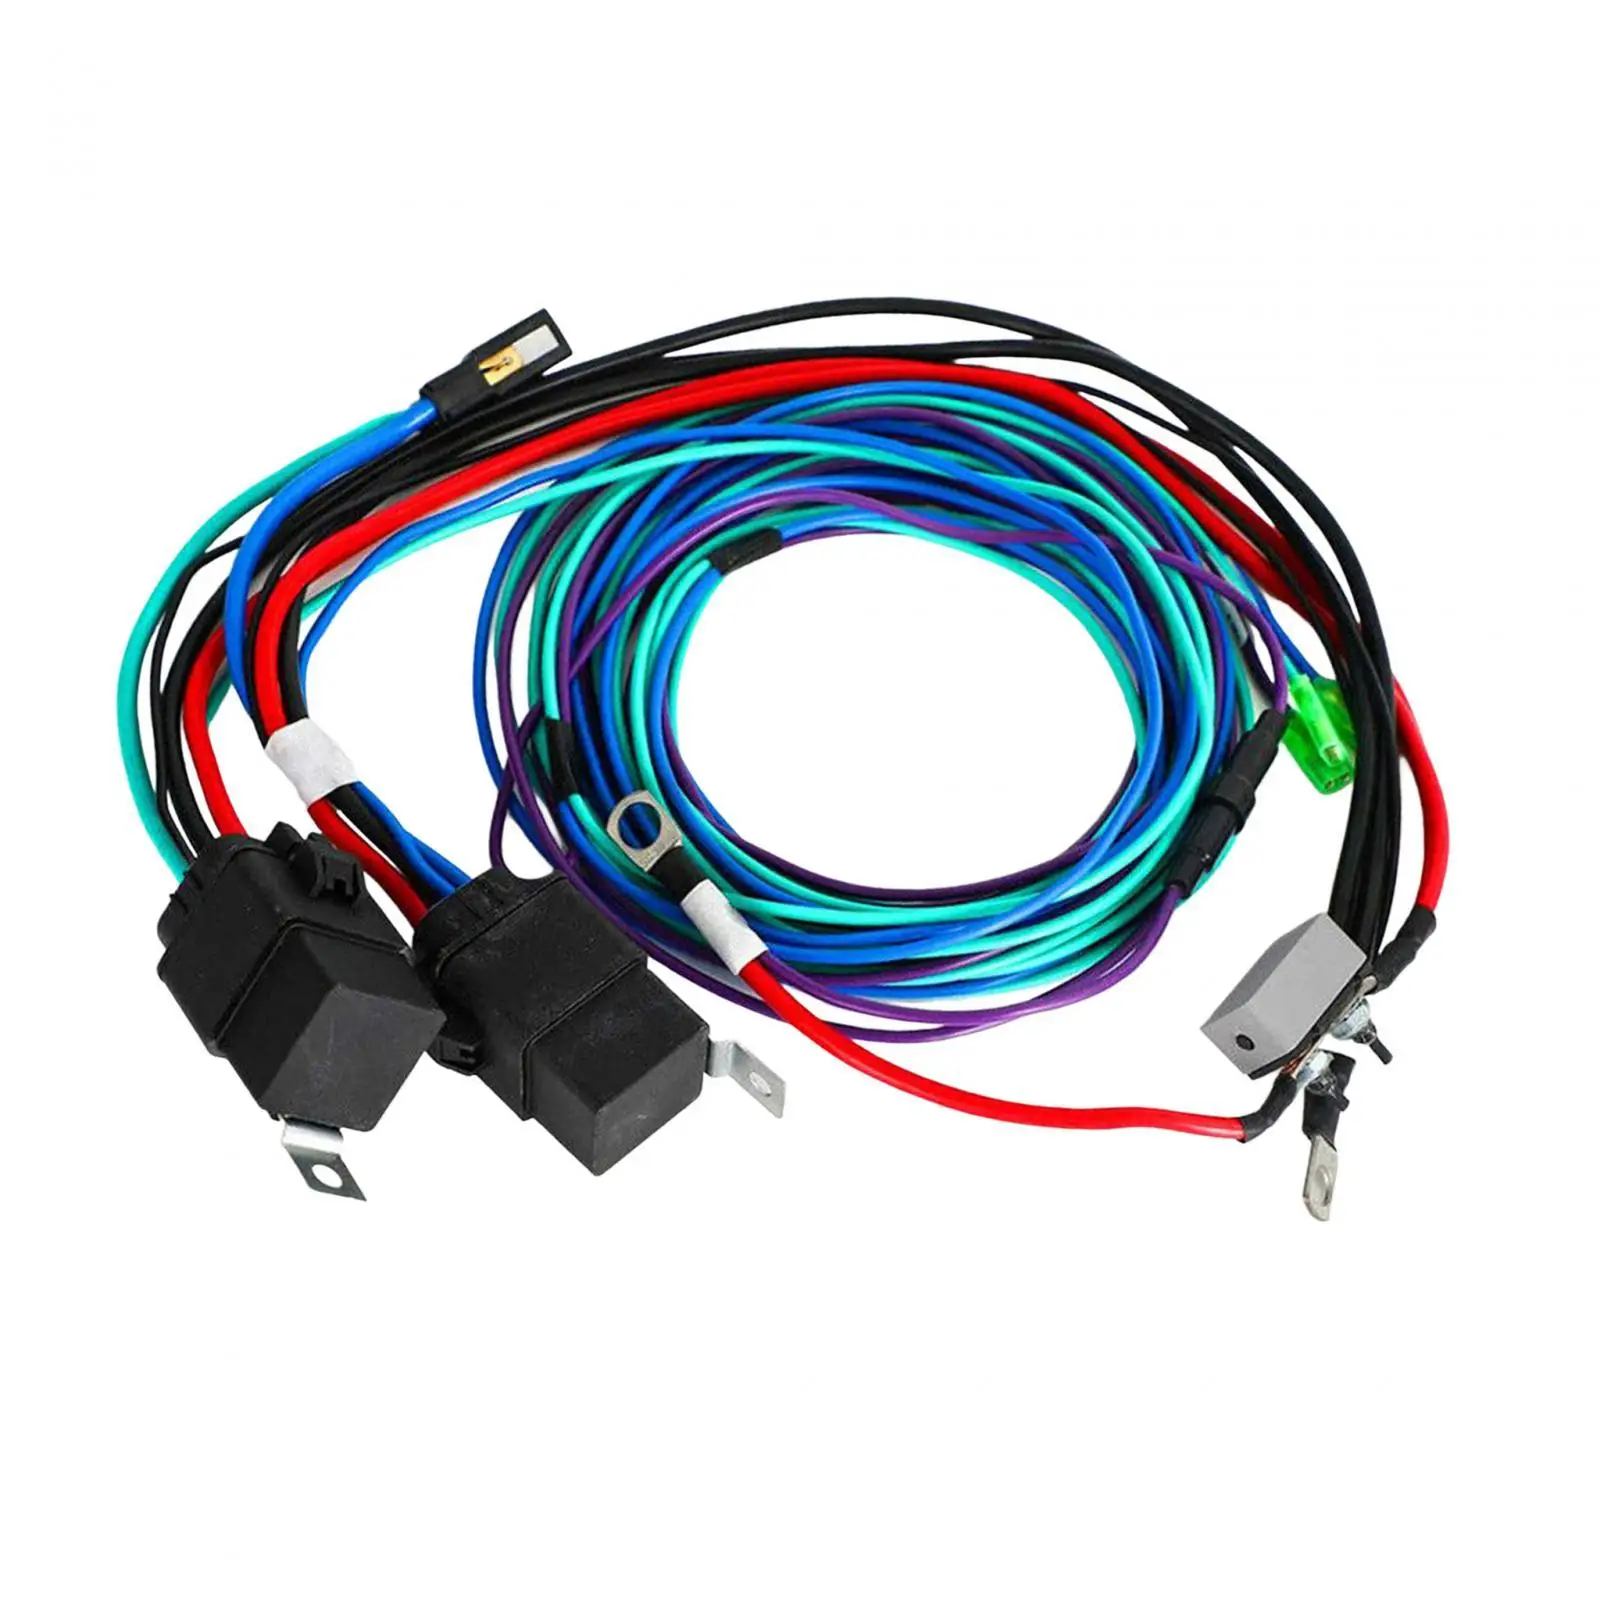 

Wiring Cable Harness Kit 7014G Directly Replace for Cmc TH Tilt Trim Unit Jack Platepl-65PT-130PT-35 Easy Installation